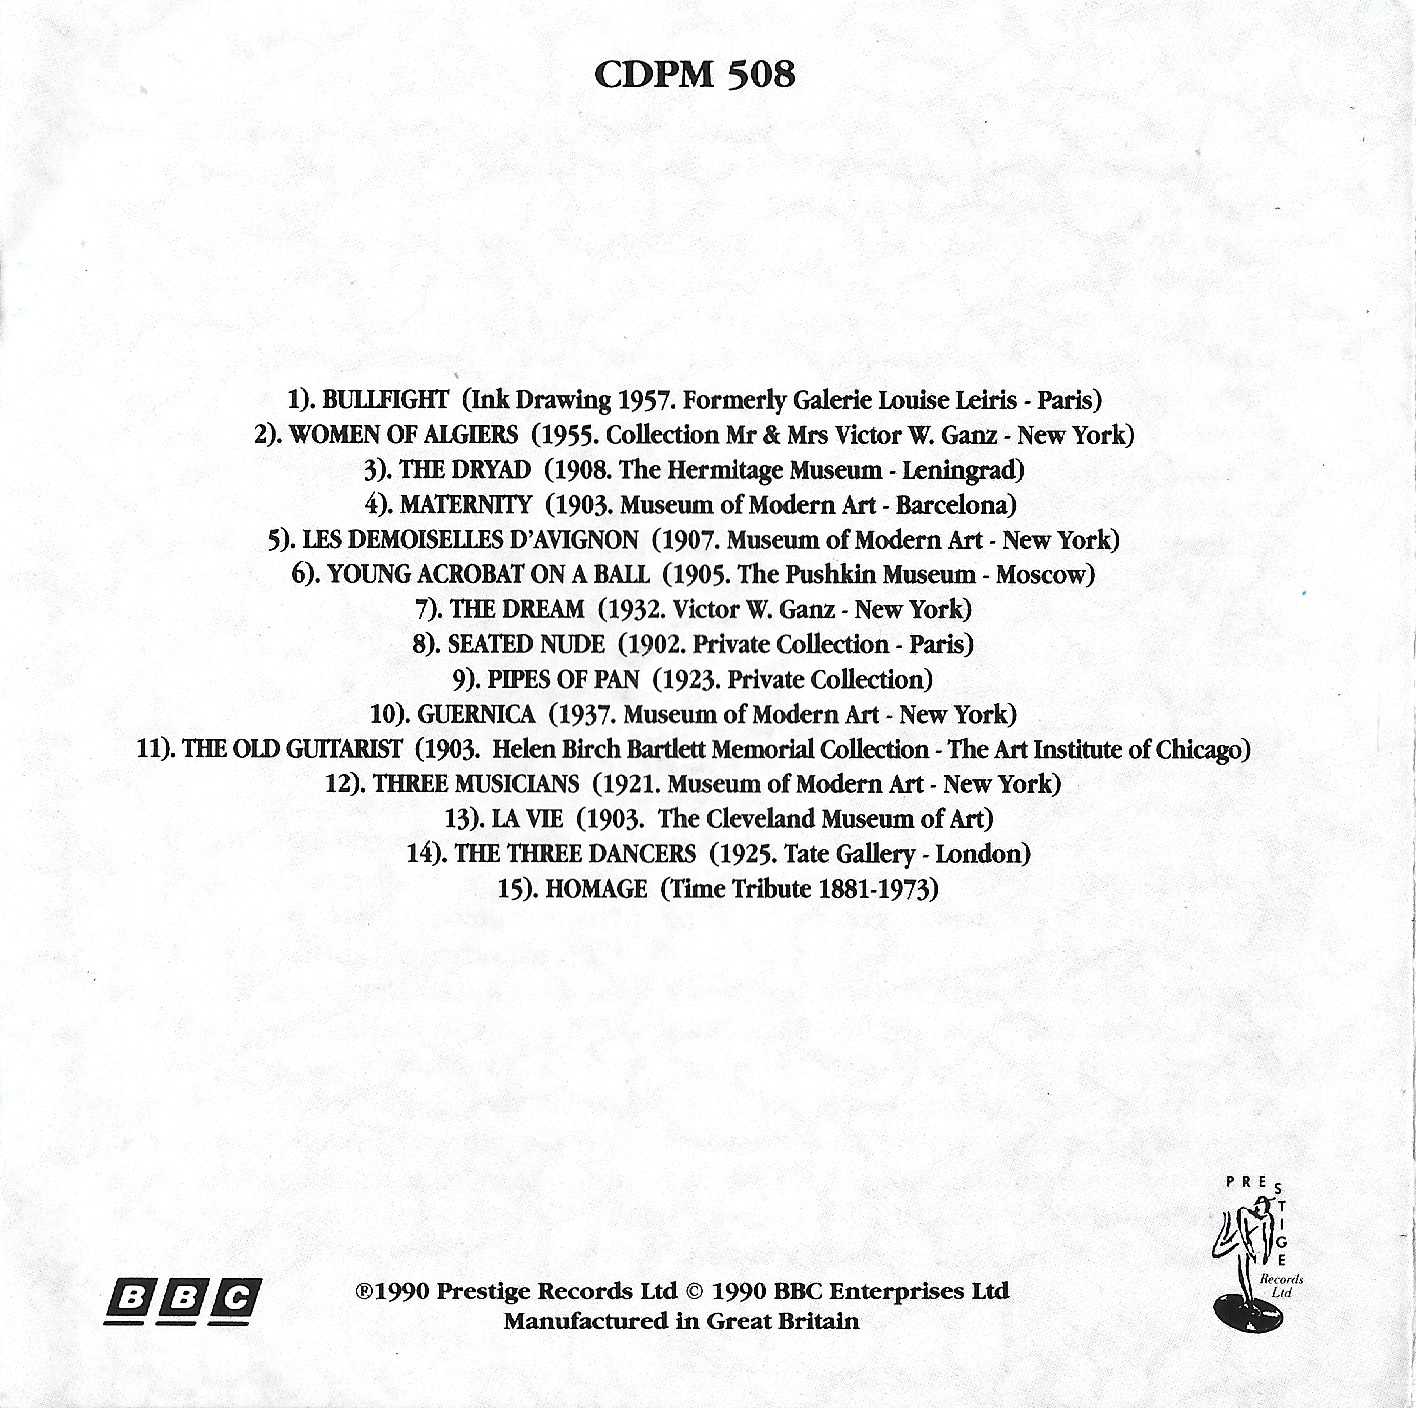 Middle of cover of CDPM 508